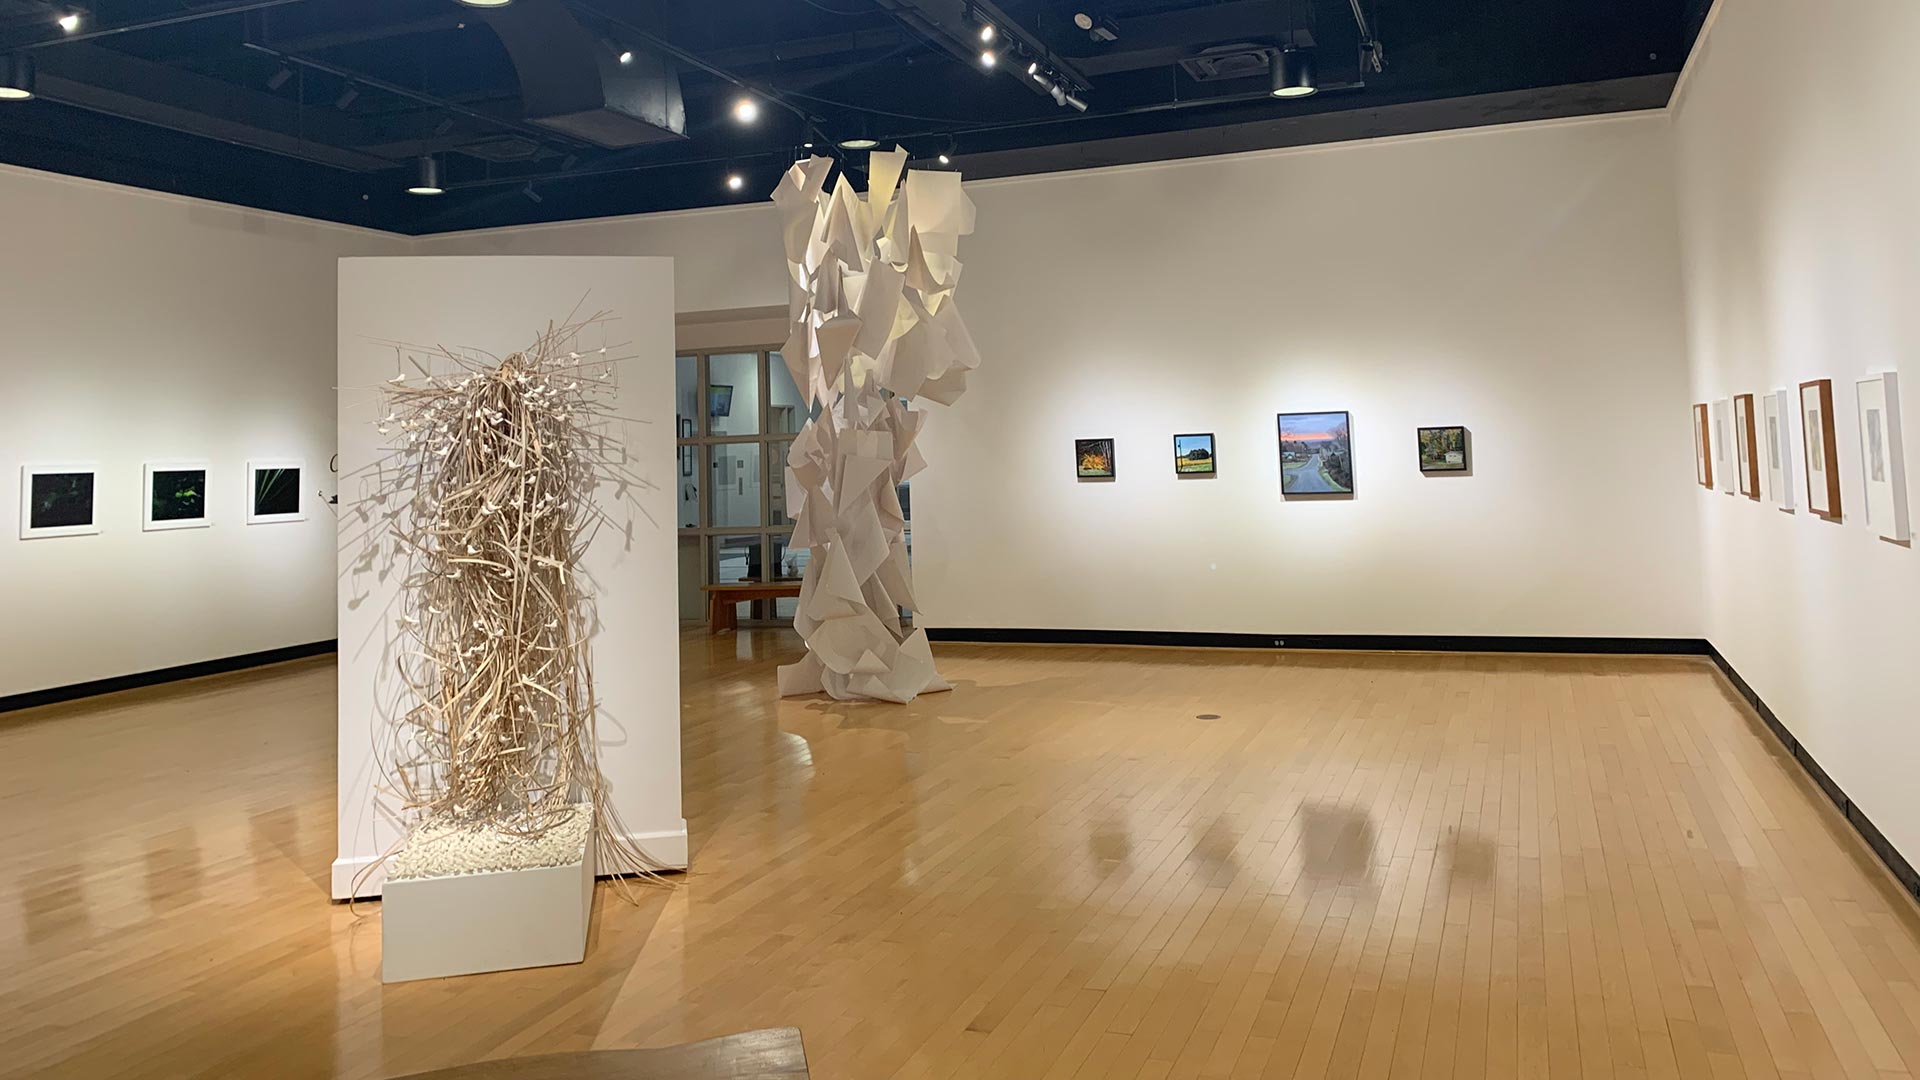 Gallery view of Organic by Nature Faculty Art Show at the Ortlip Gallery at Houghton University.